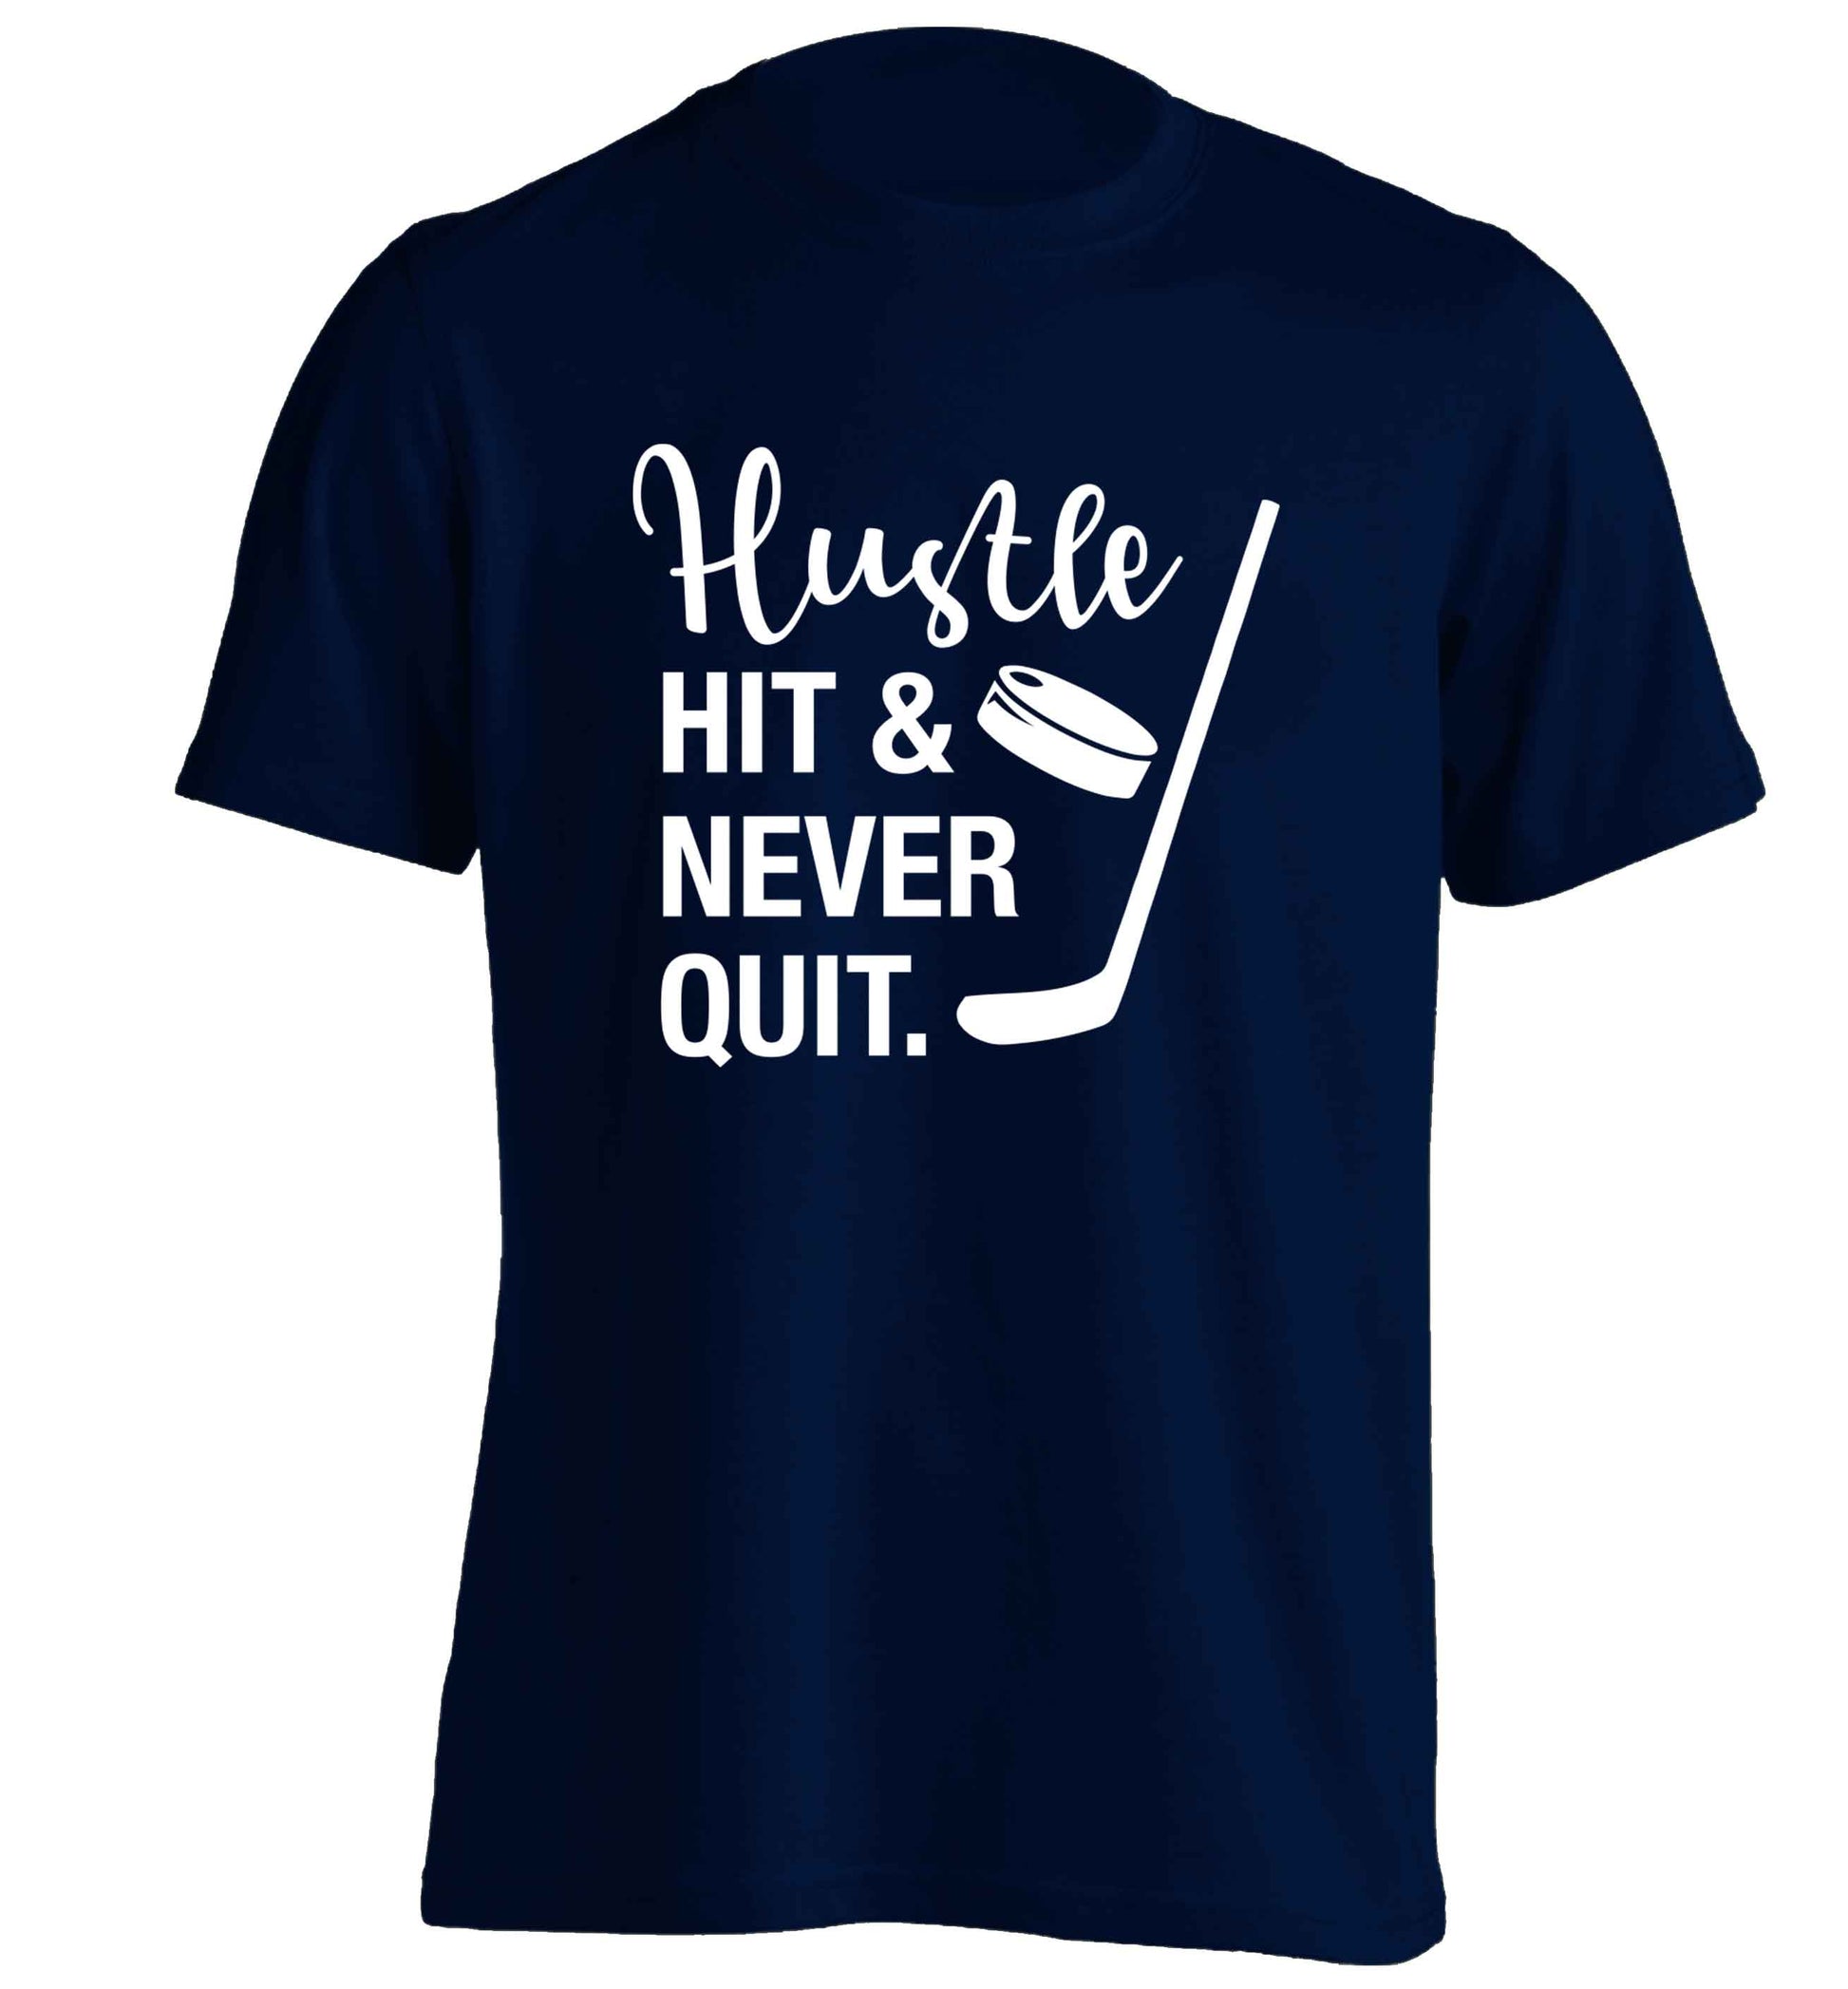 Hustle hit and never quit adults unisex navy Tshirt 2XL